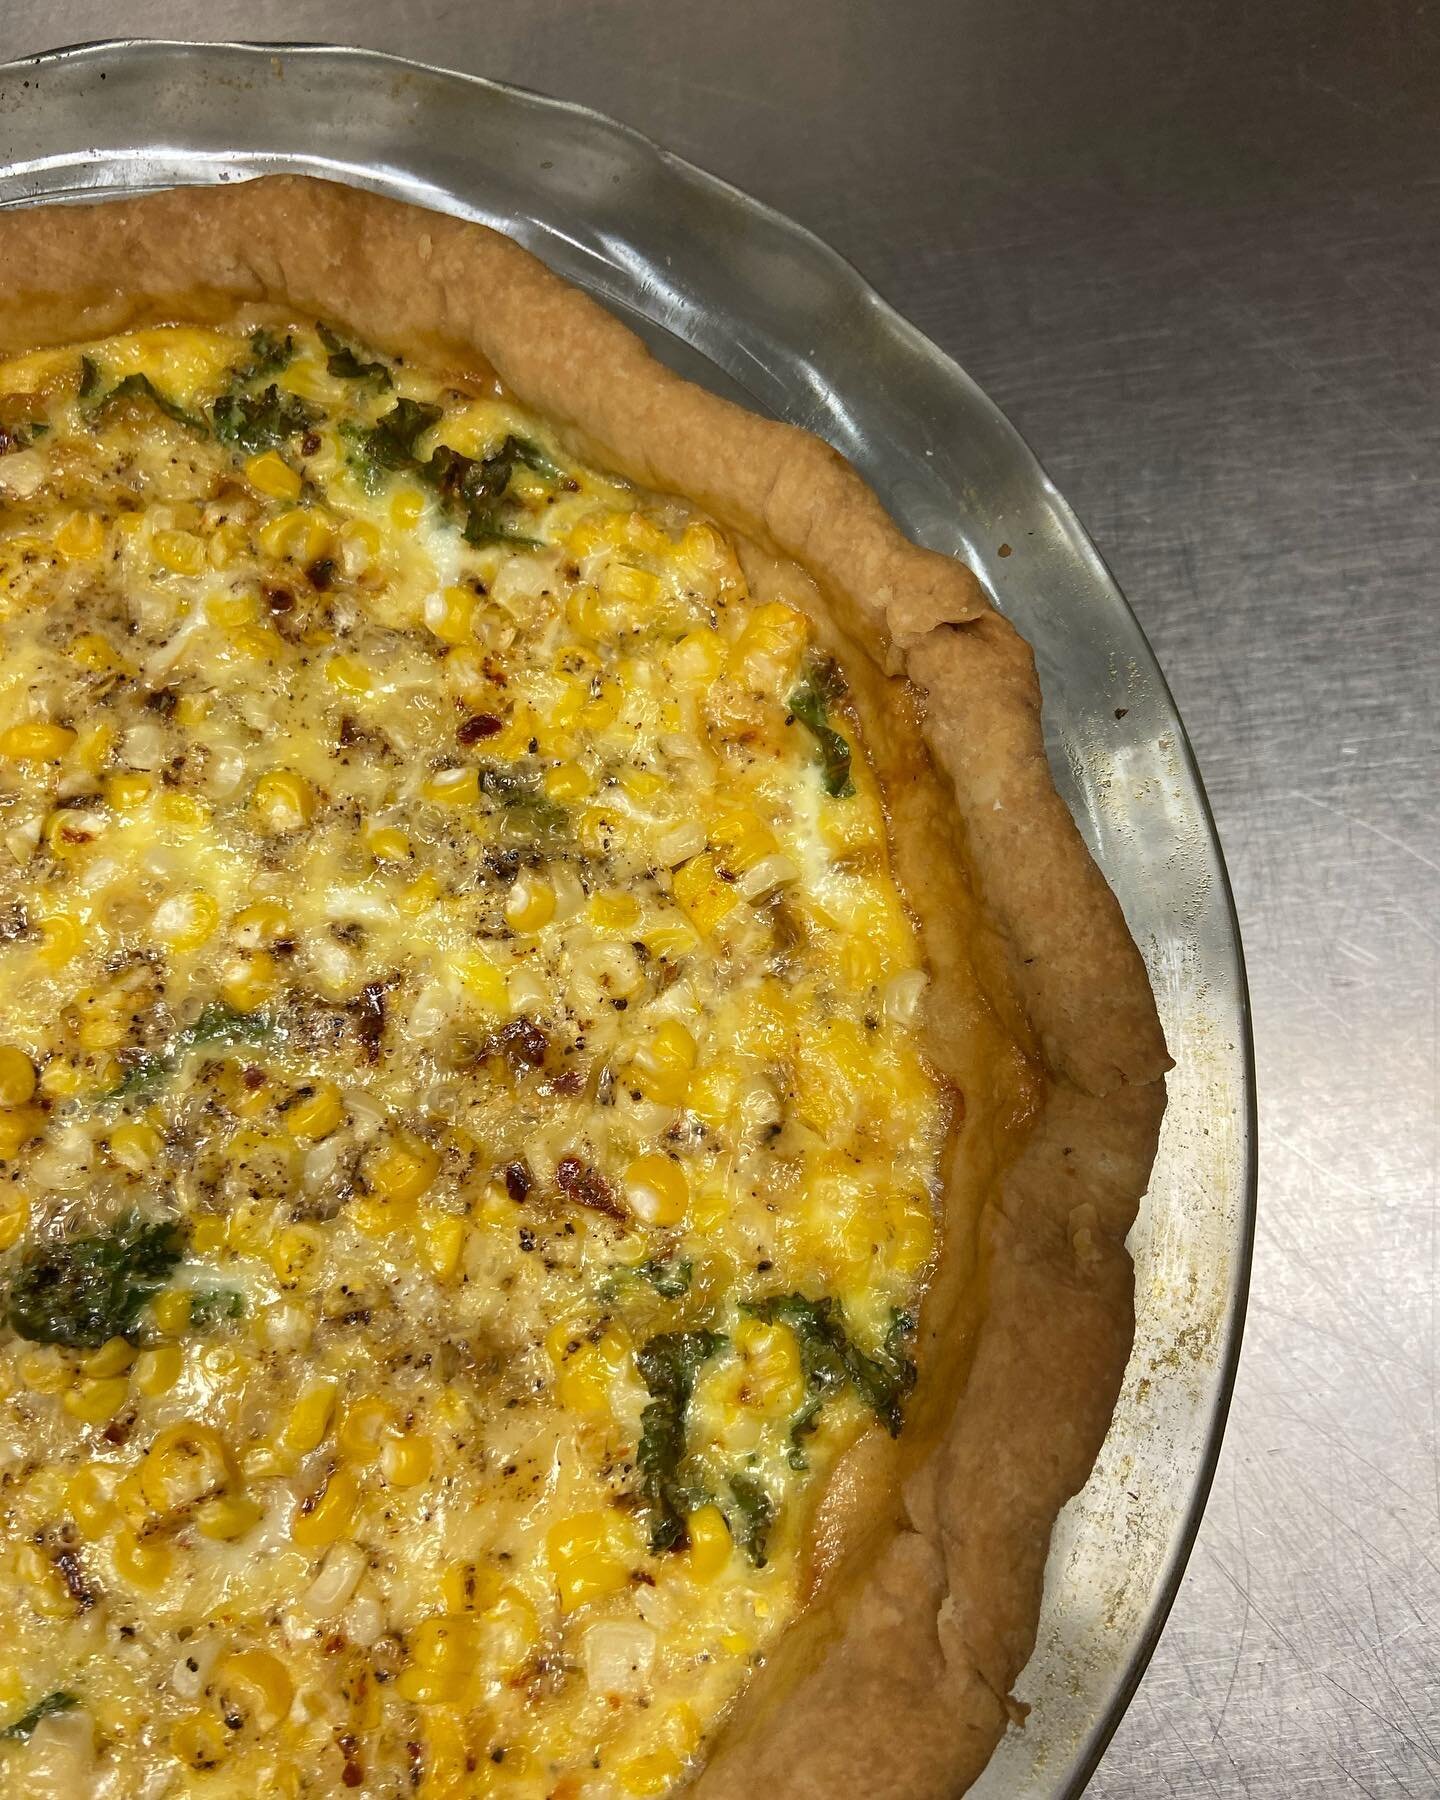 Jersey corn making an appearance in today&rsquo;s quiche 🤩 #truesalvagecafe #cafe #bakery #corn #jerseyproduce #mapso #soma #quiche #maplewoodnj #njeats #njfoodie #southorangenj #njcafe #summervibes #🌽 #yum #getinmybelly #foodpic #foodgram #foodisl